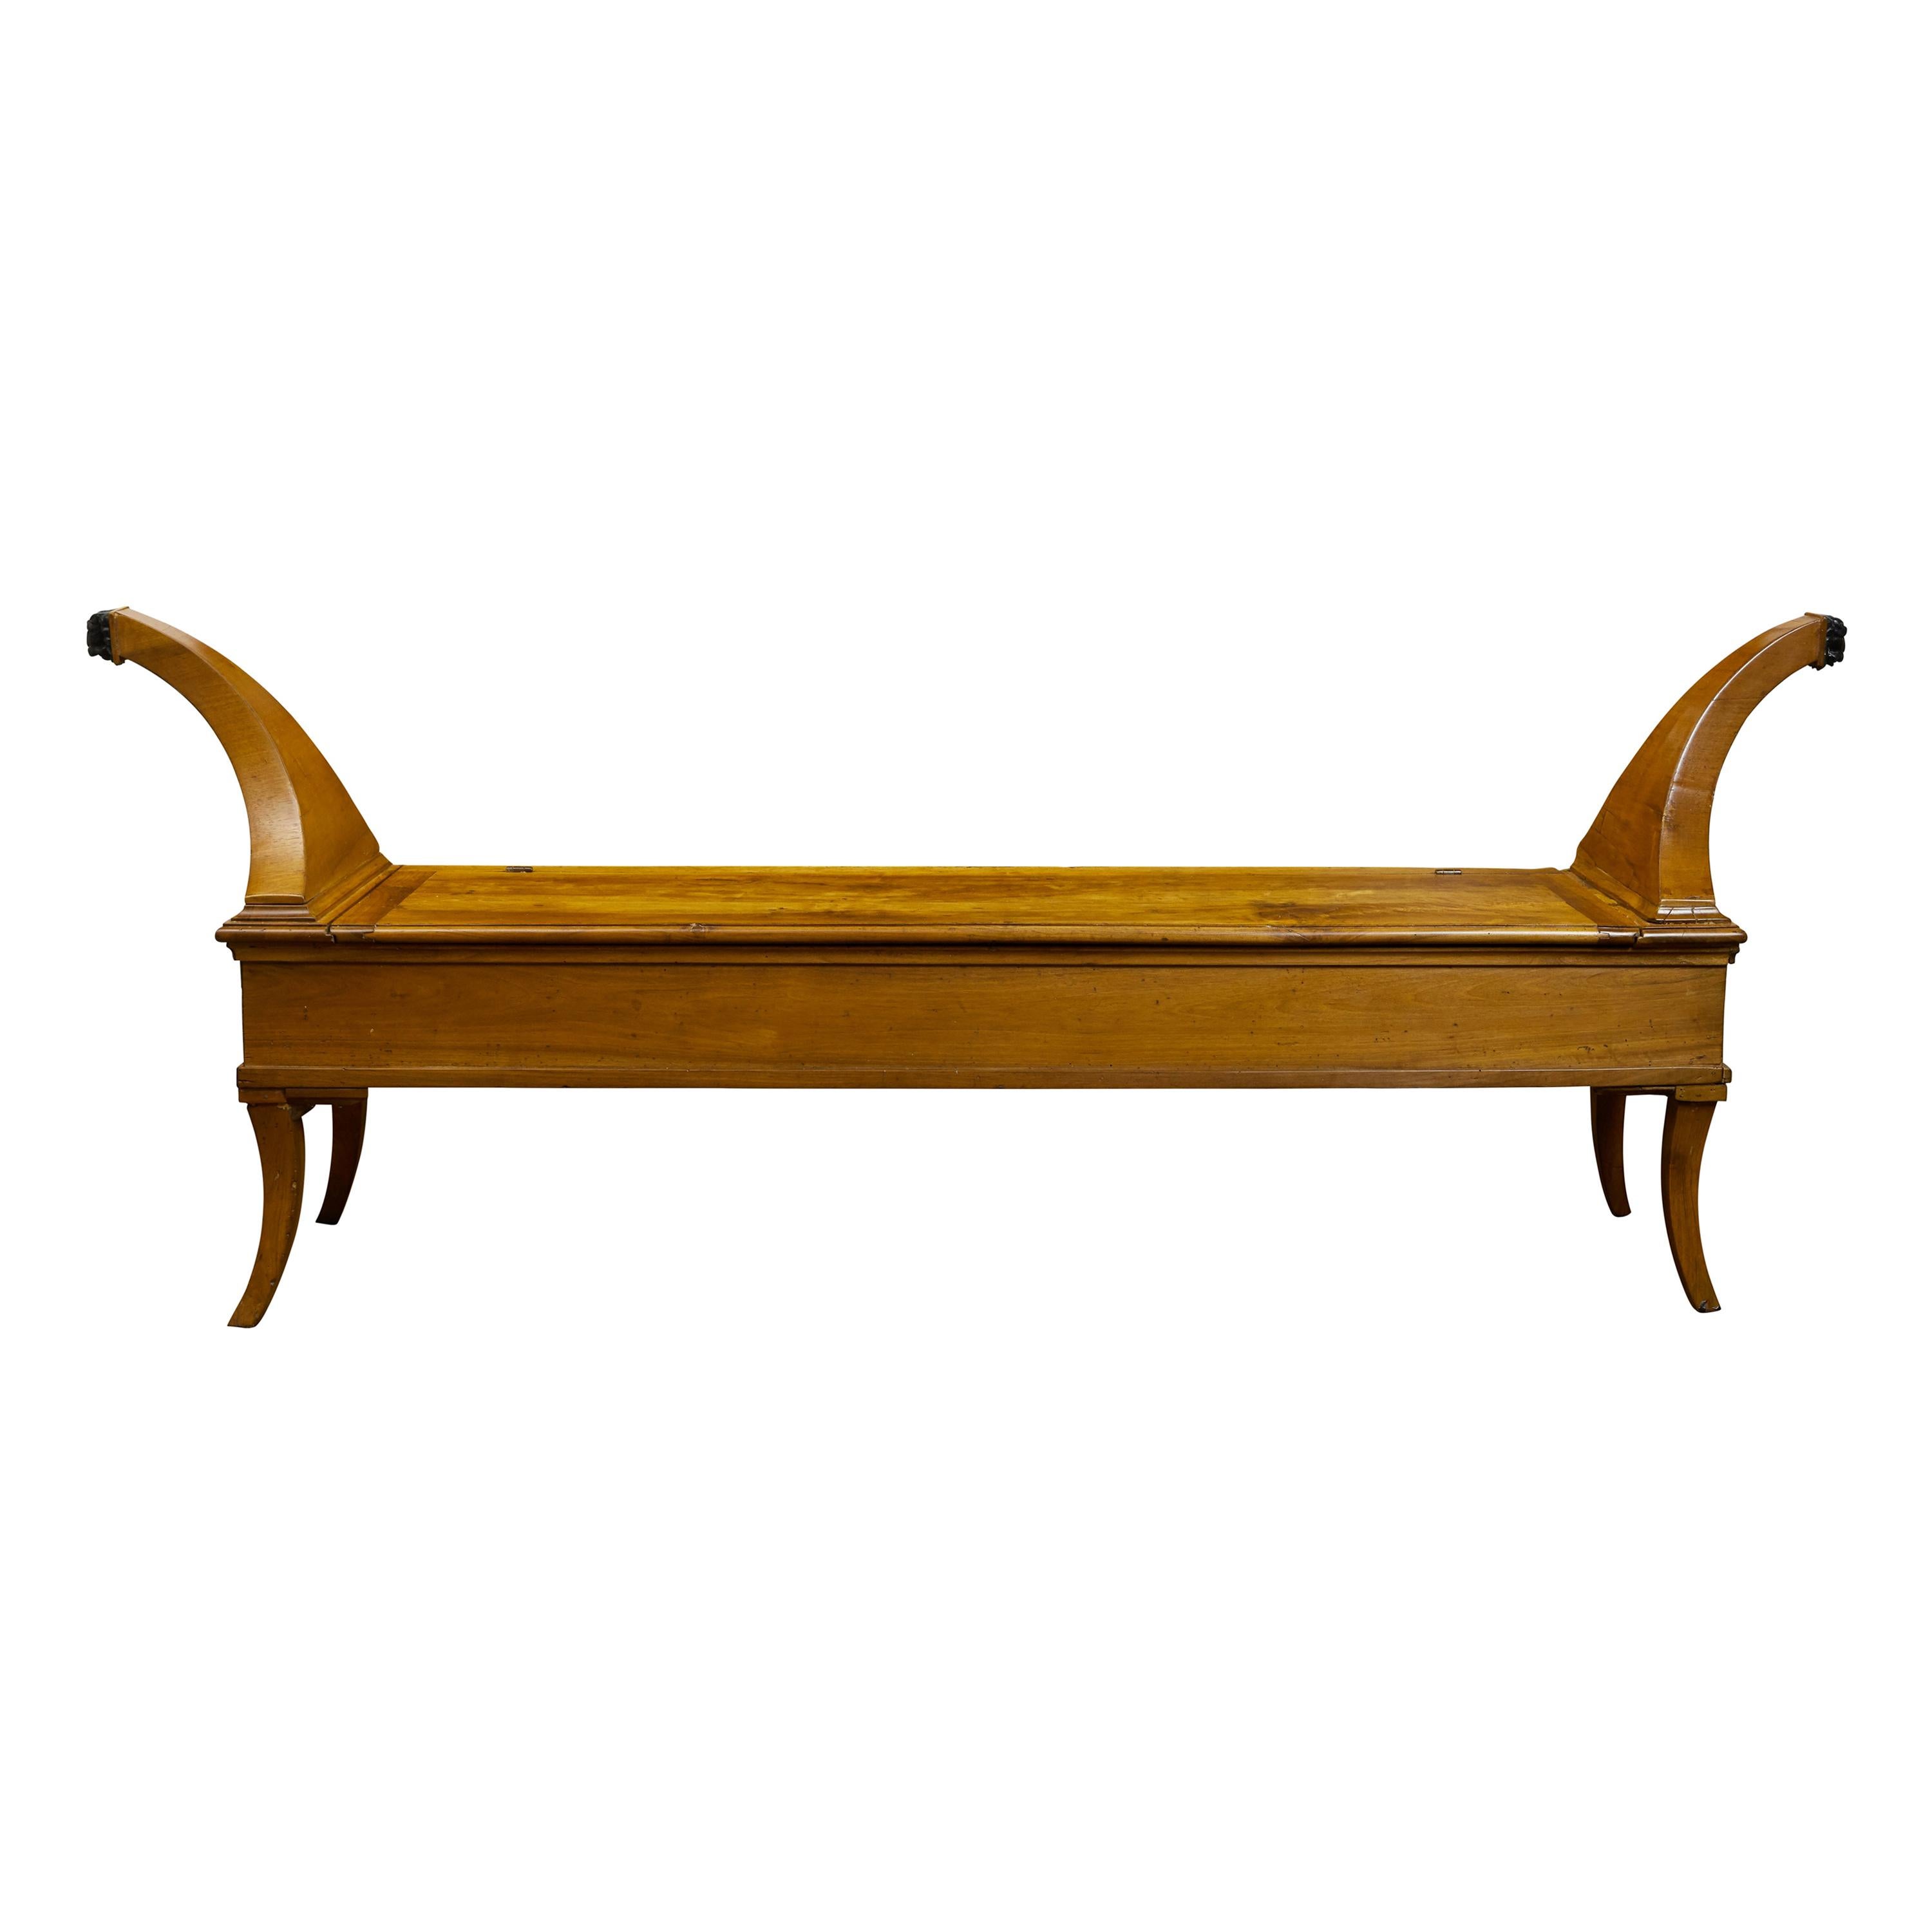 French 1820s Restauration Walnut Bench with Lift-Top Seat and Curving Arms For Sale